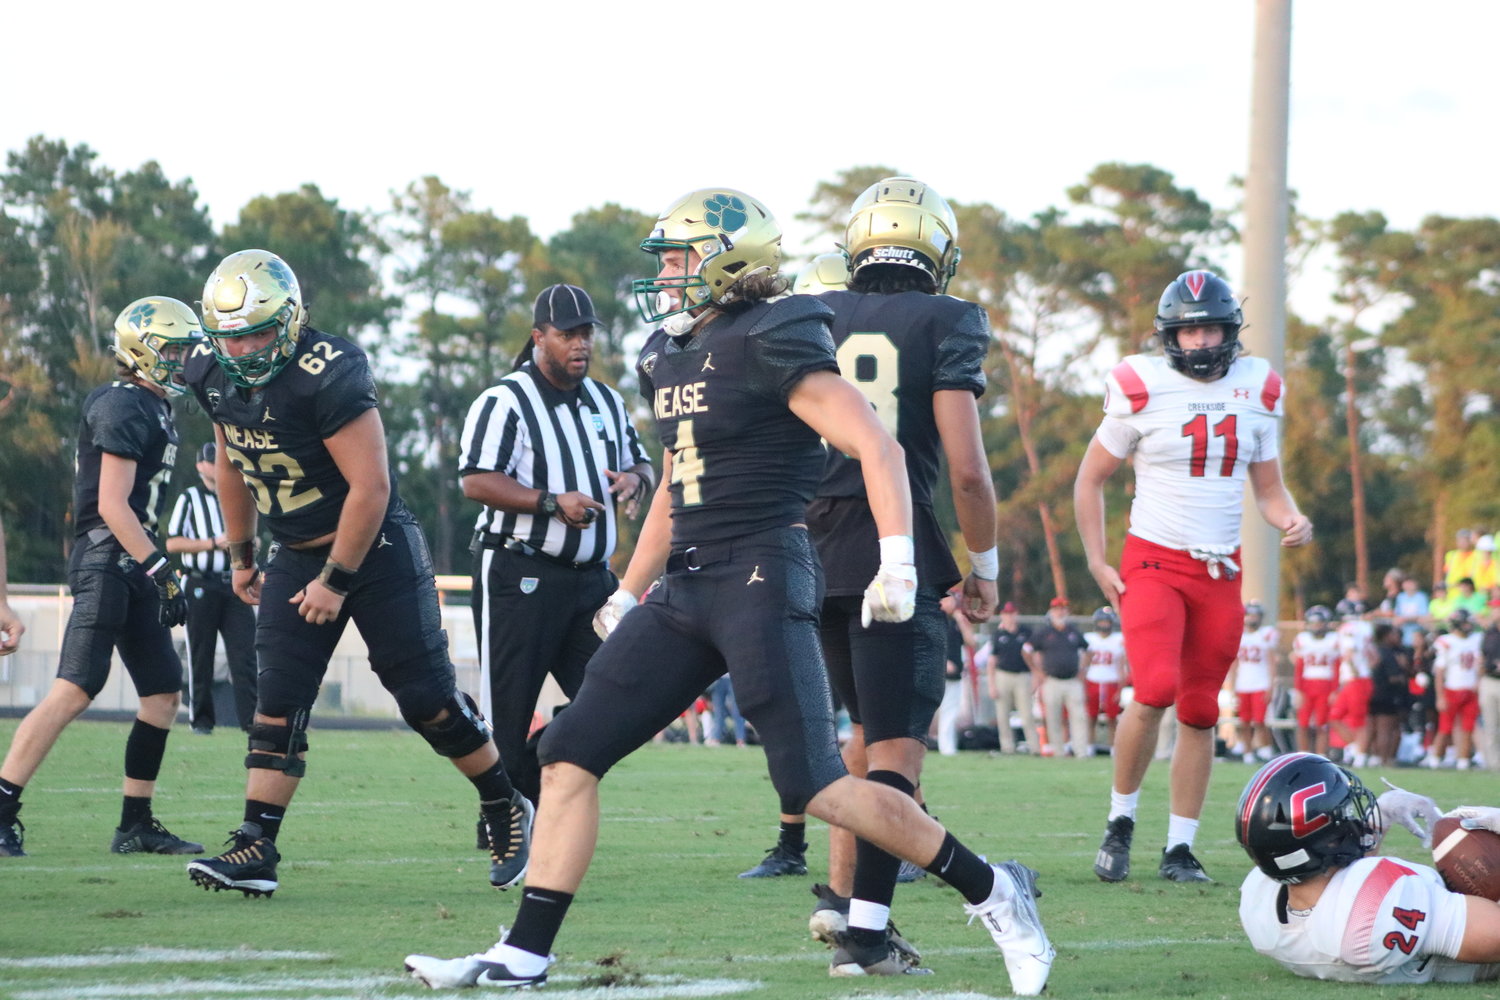 Ben Bogle (No. 4), Cameron Helt (No. 62) and rest of the Nease defense will be tested when they go up against Orange Park’s offense and running back JoJo Restall Sept. 10.